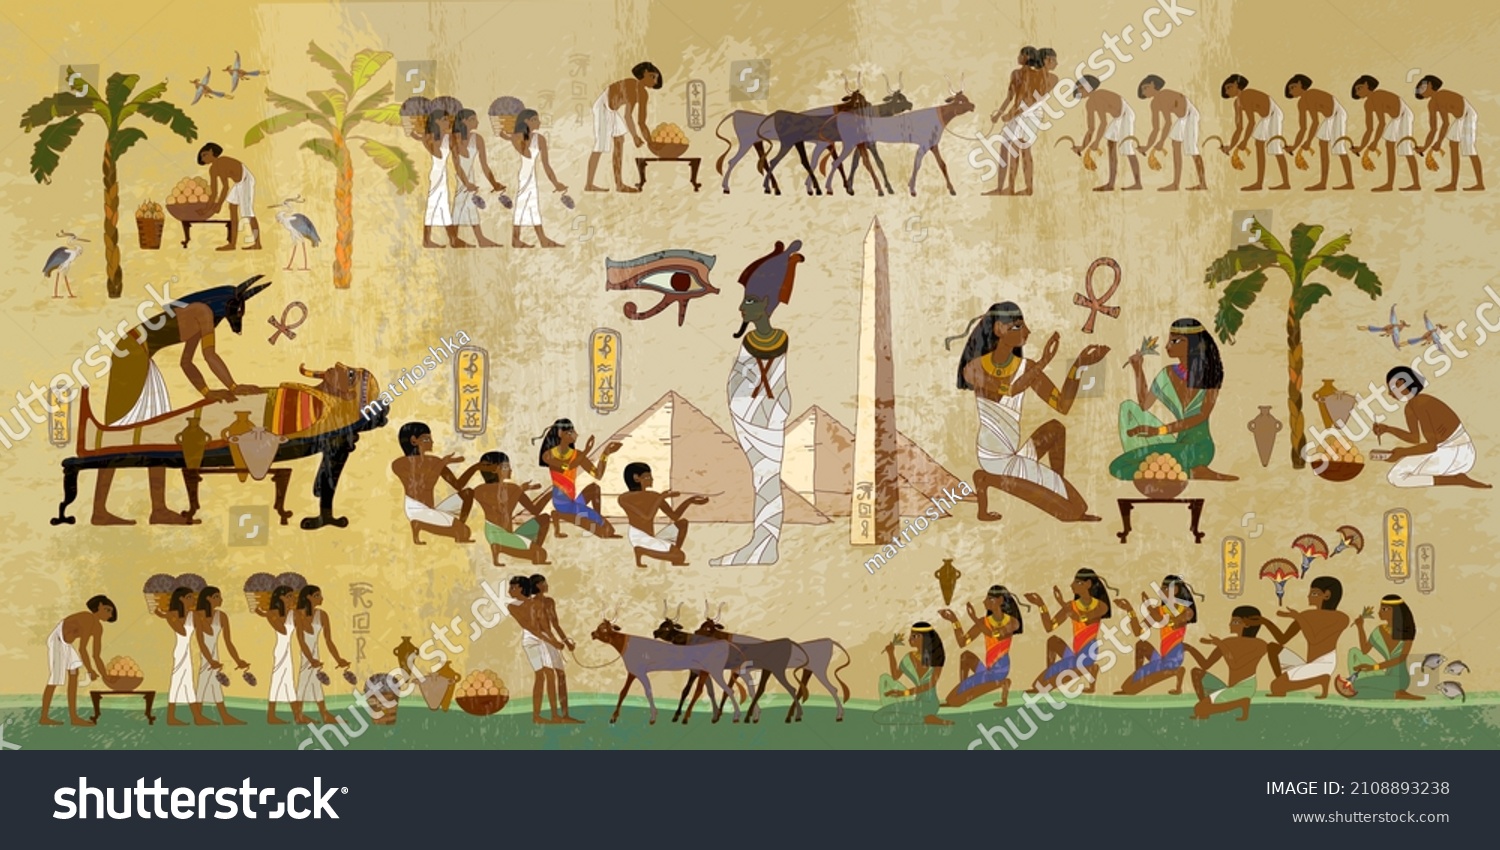 Life of egyptians. Agriculture, workmanship, fishery, farm. Ancient Egypt frescoes. Hieroglyphic carvings on exterior walls of an ancient temple   #2108893238